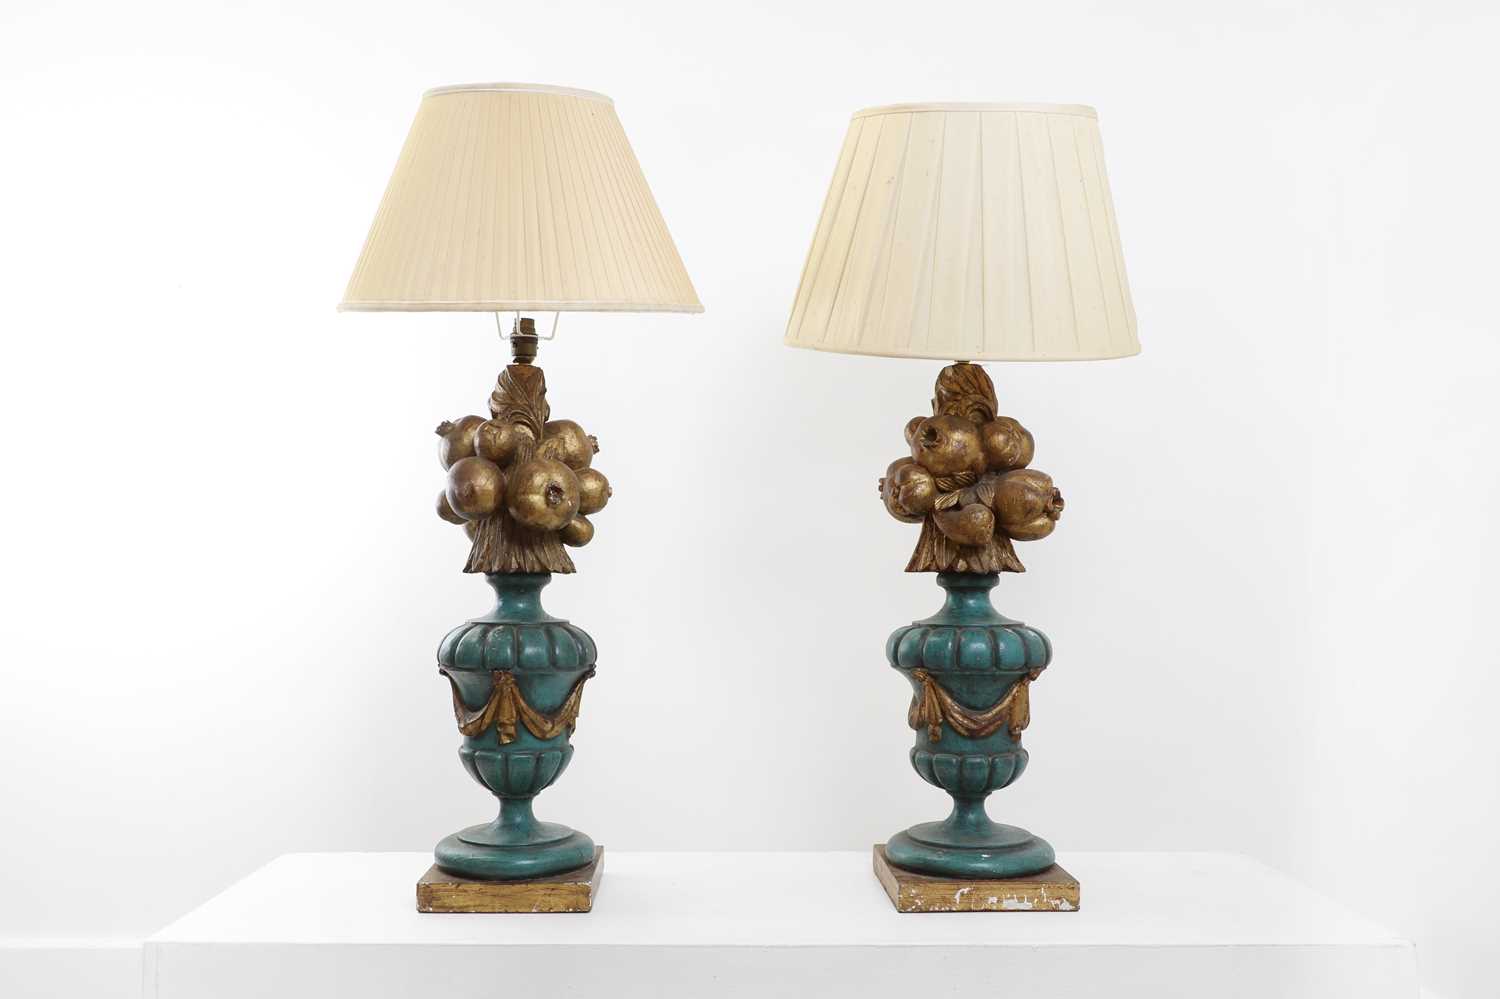 Lot 151 - A pair of painted wooden table lamps